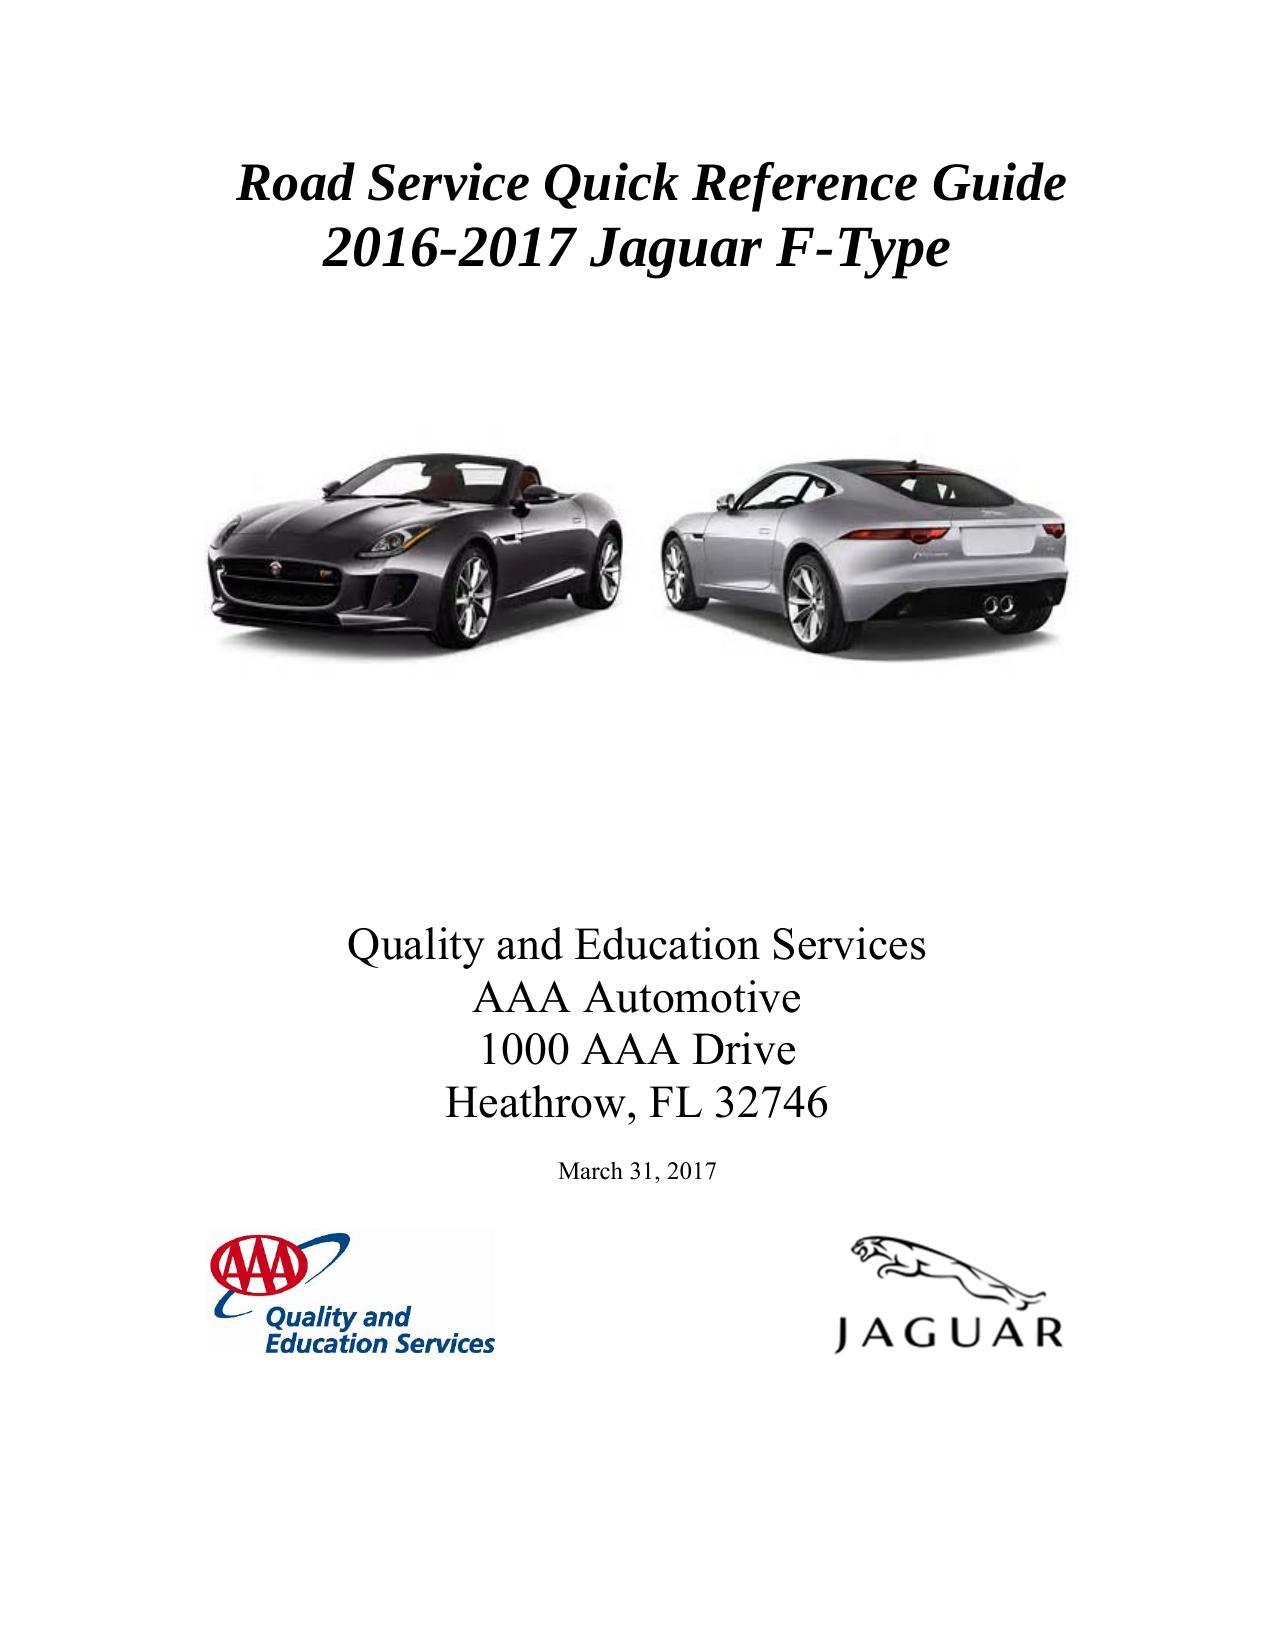 2016-2017-jaguar-f-type-road-service-quick-reference-guide.pdf